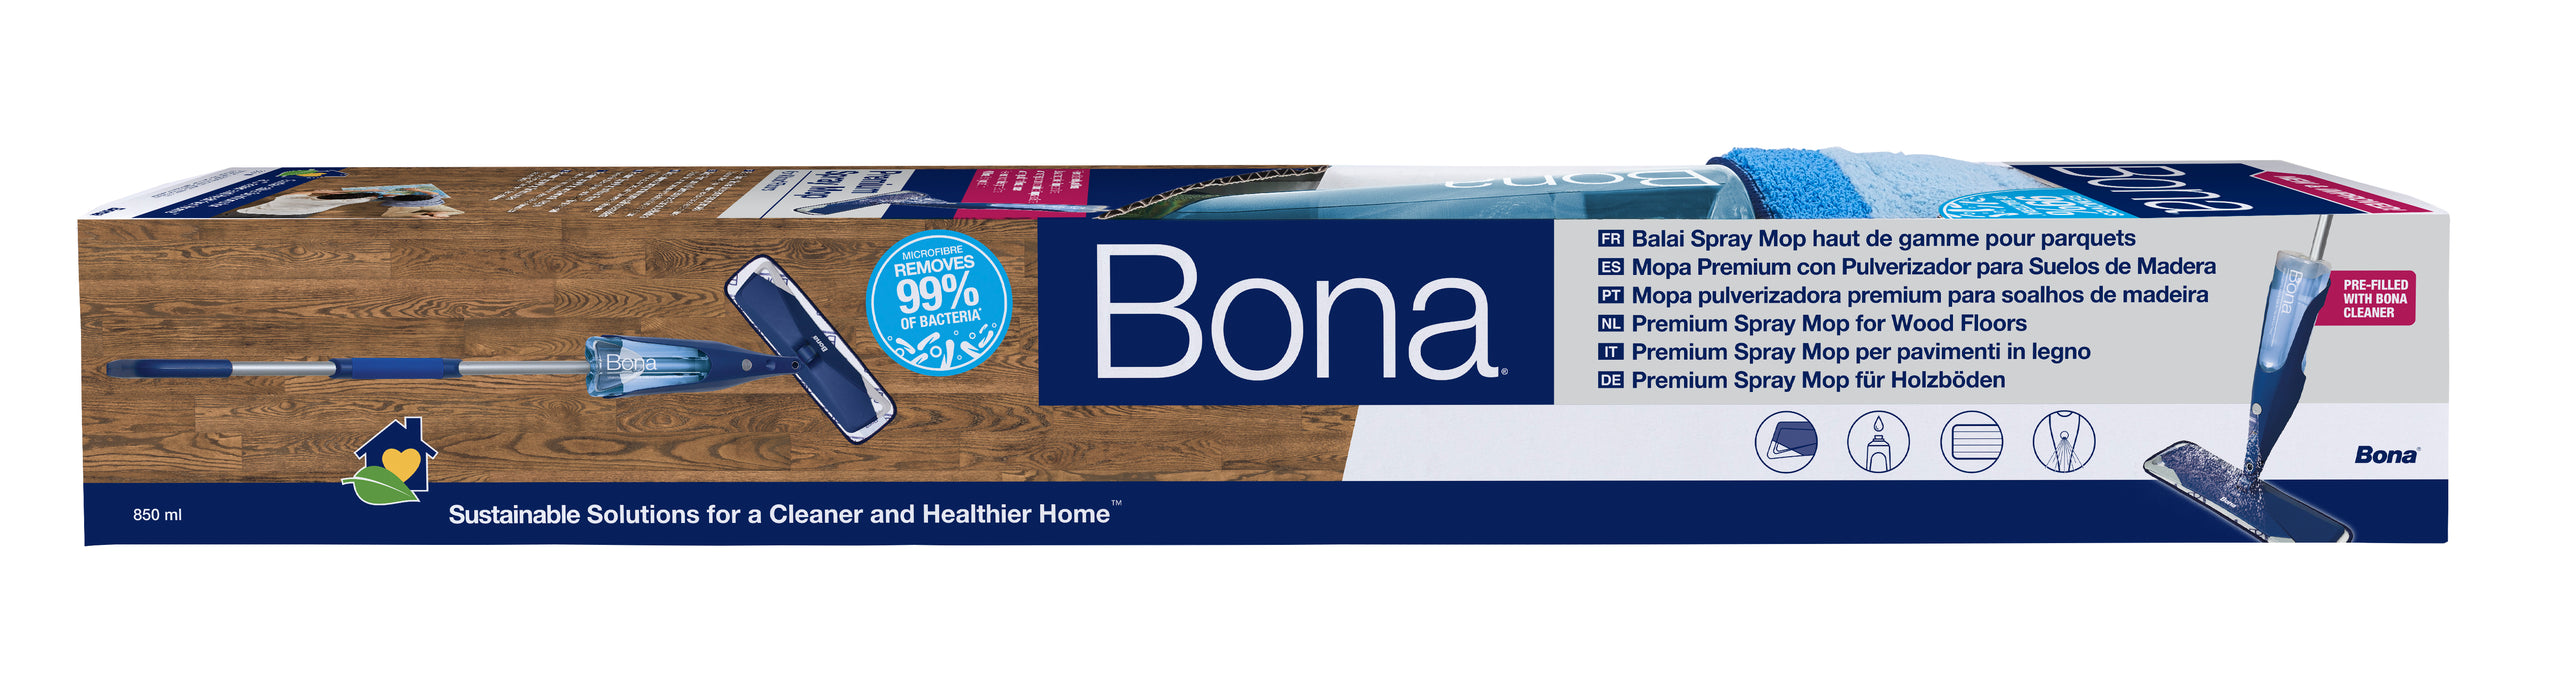 Bona Floor Cleaning Timber Spray Mop with refillable cartridge